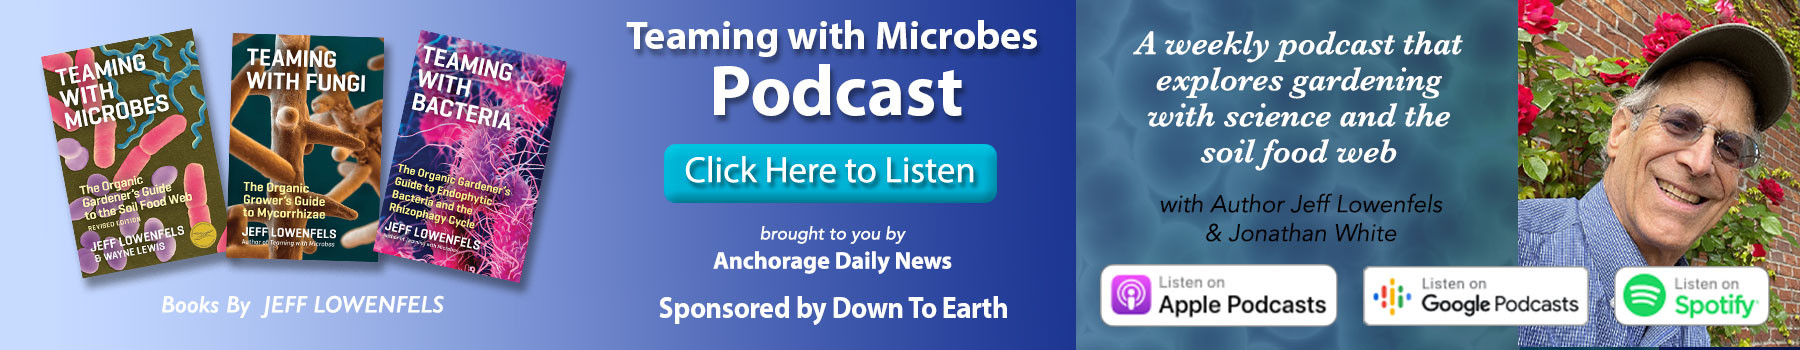 Teaming with Microbes - Listen to Podcast